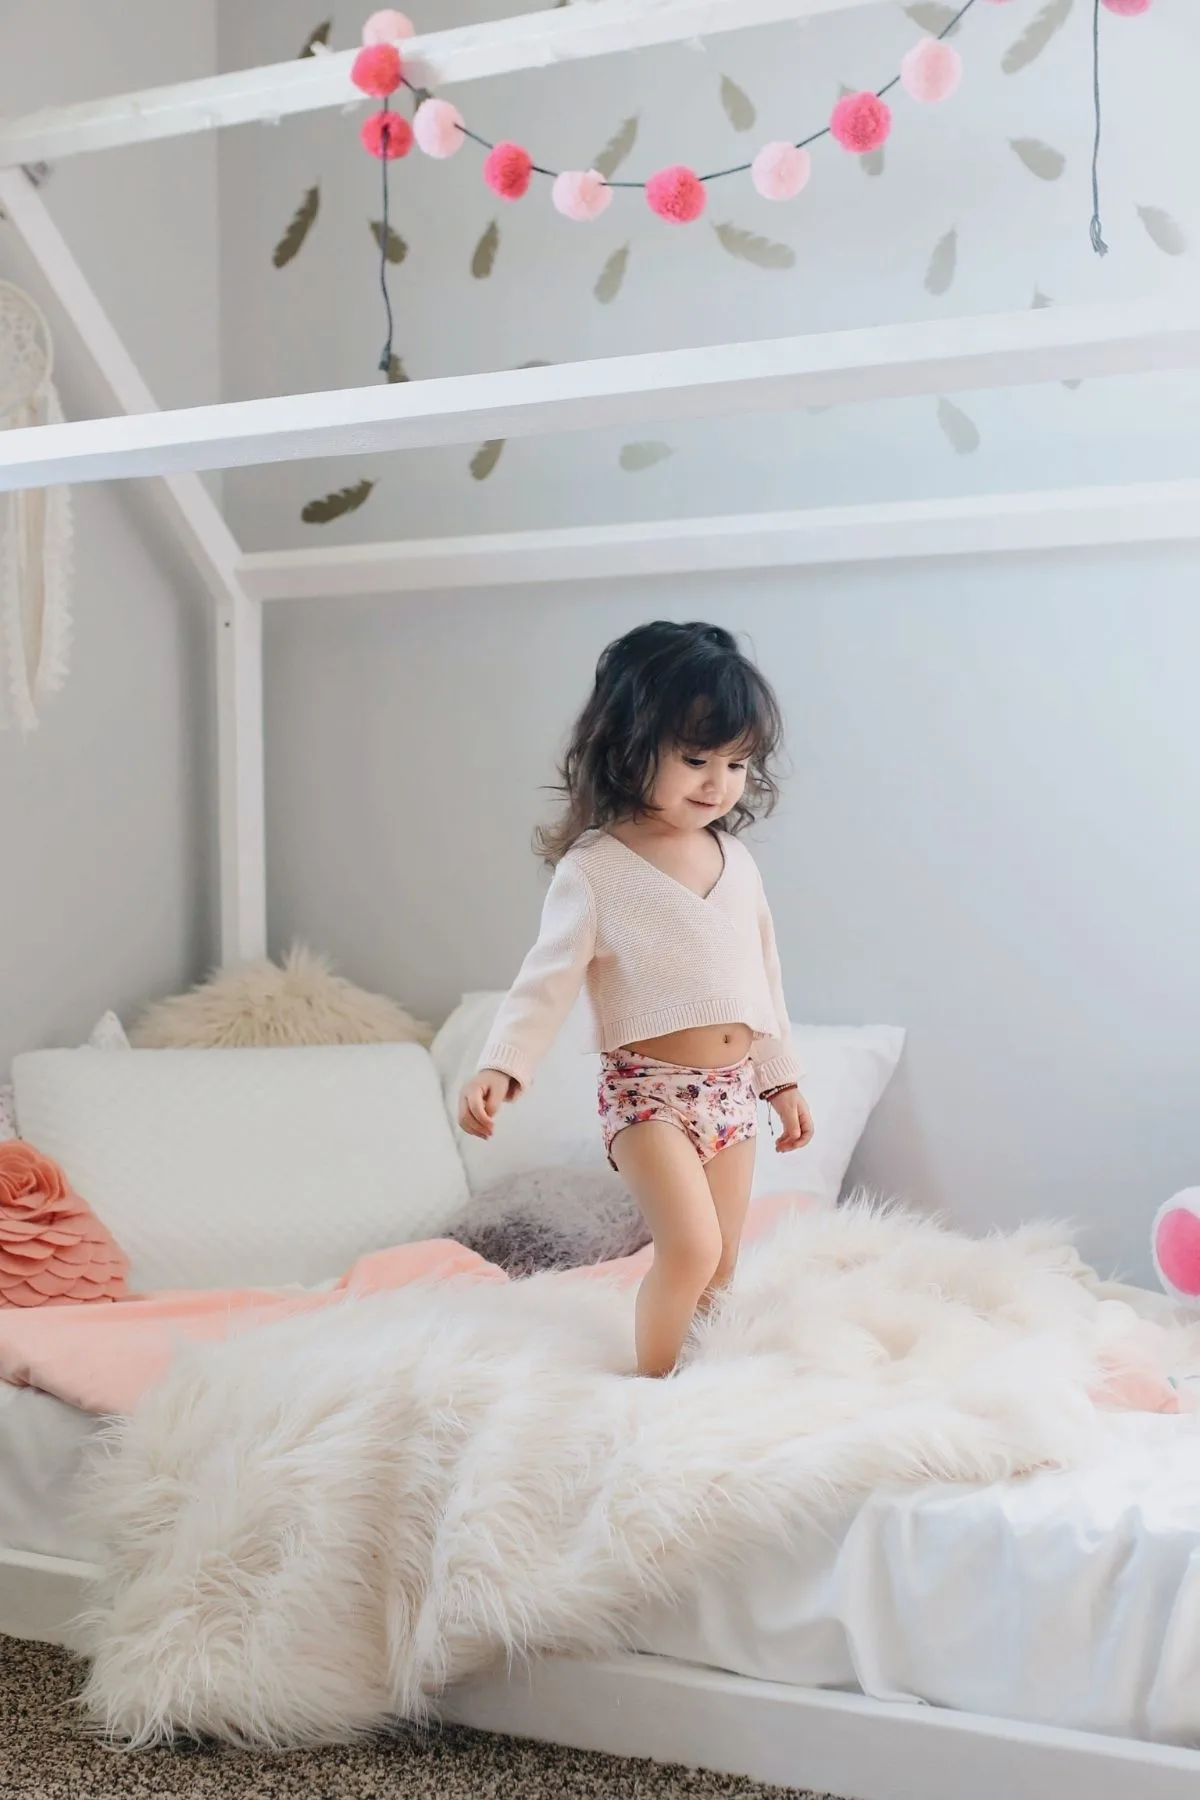 Toddler girl stands on her bed with pink and white sheets and decorations.